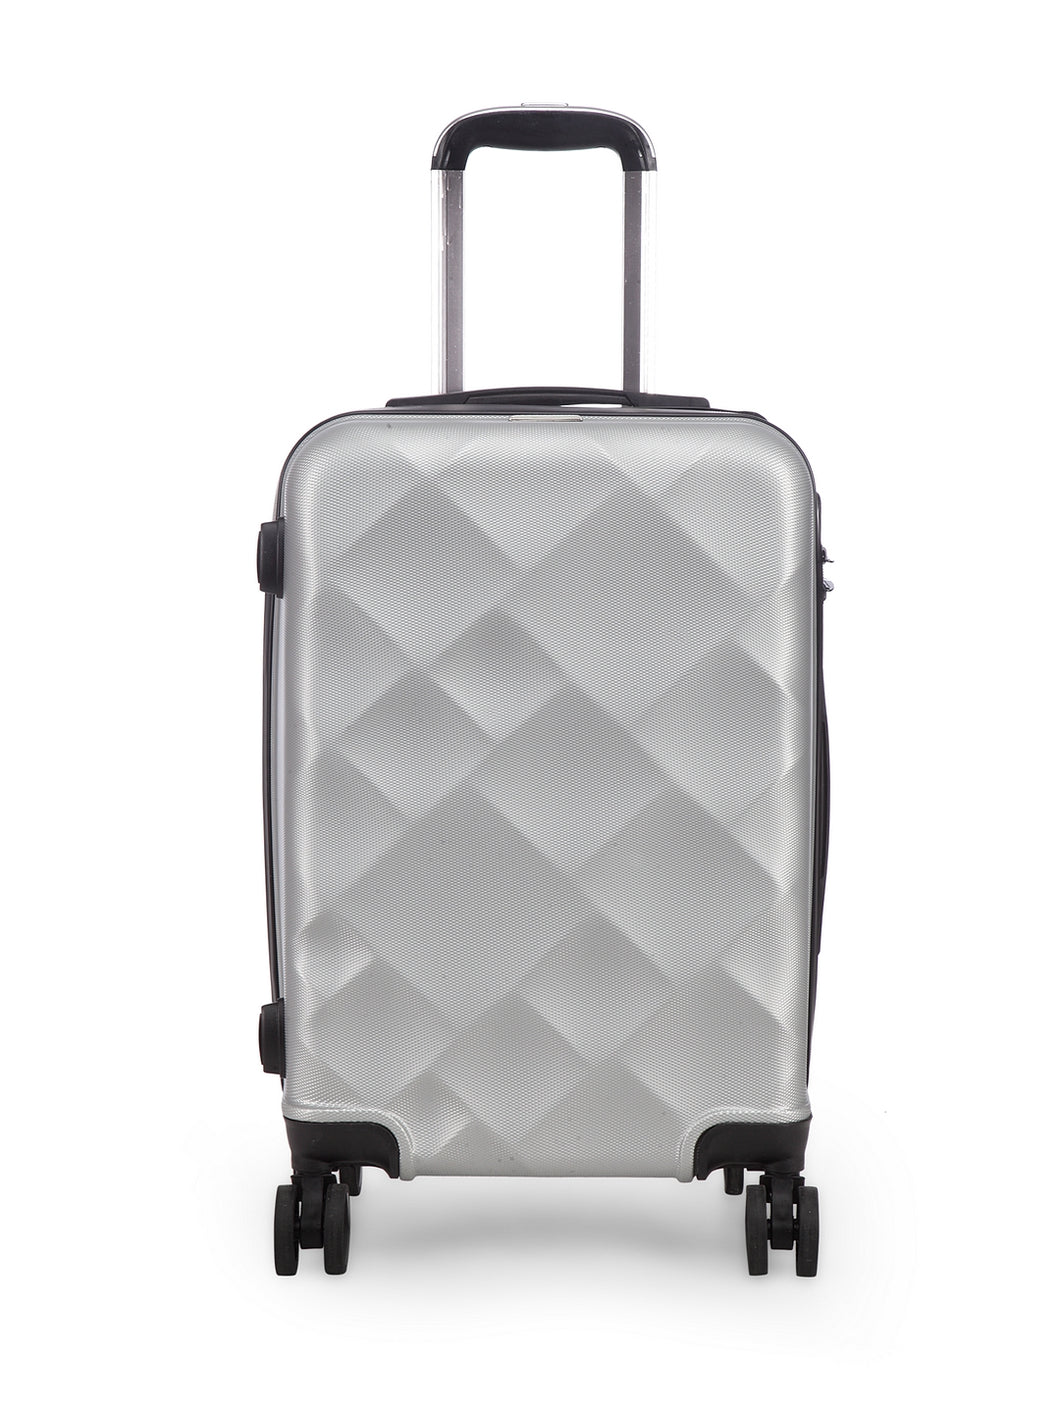 Unisex Silver Textured Hard-Sided Cabin Trolley Suitcase